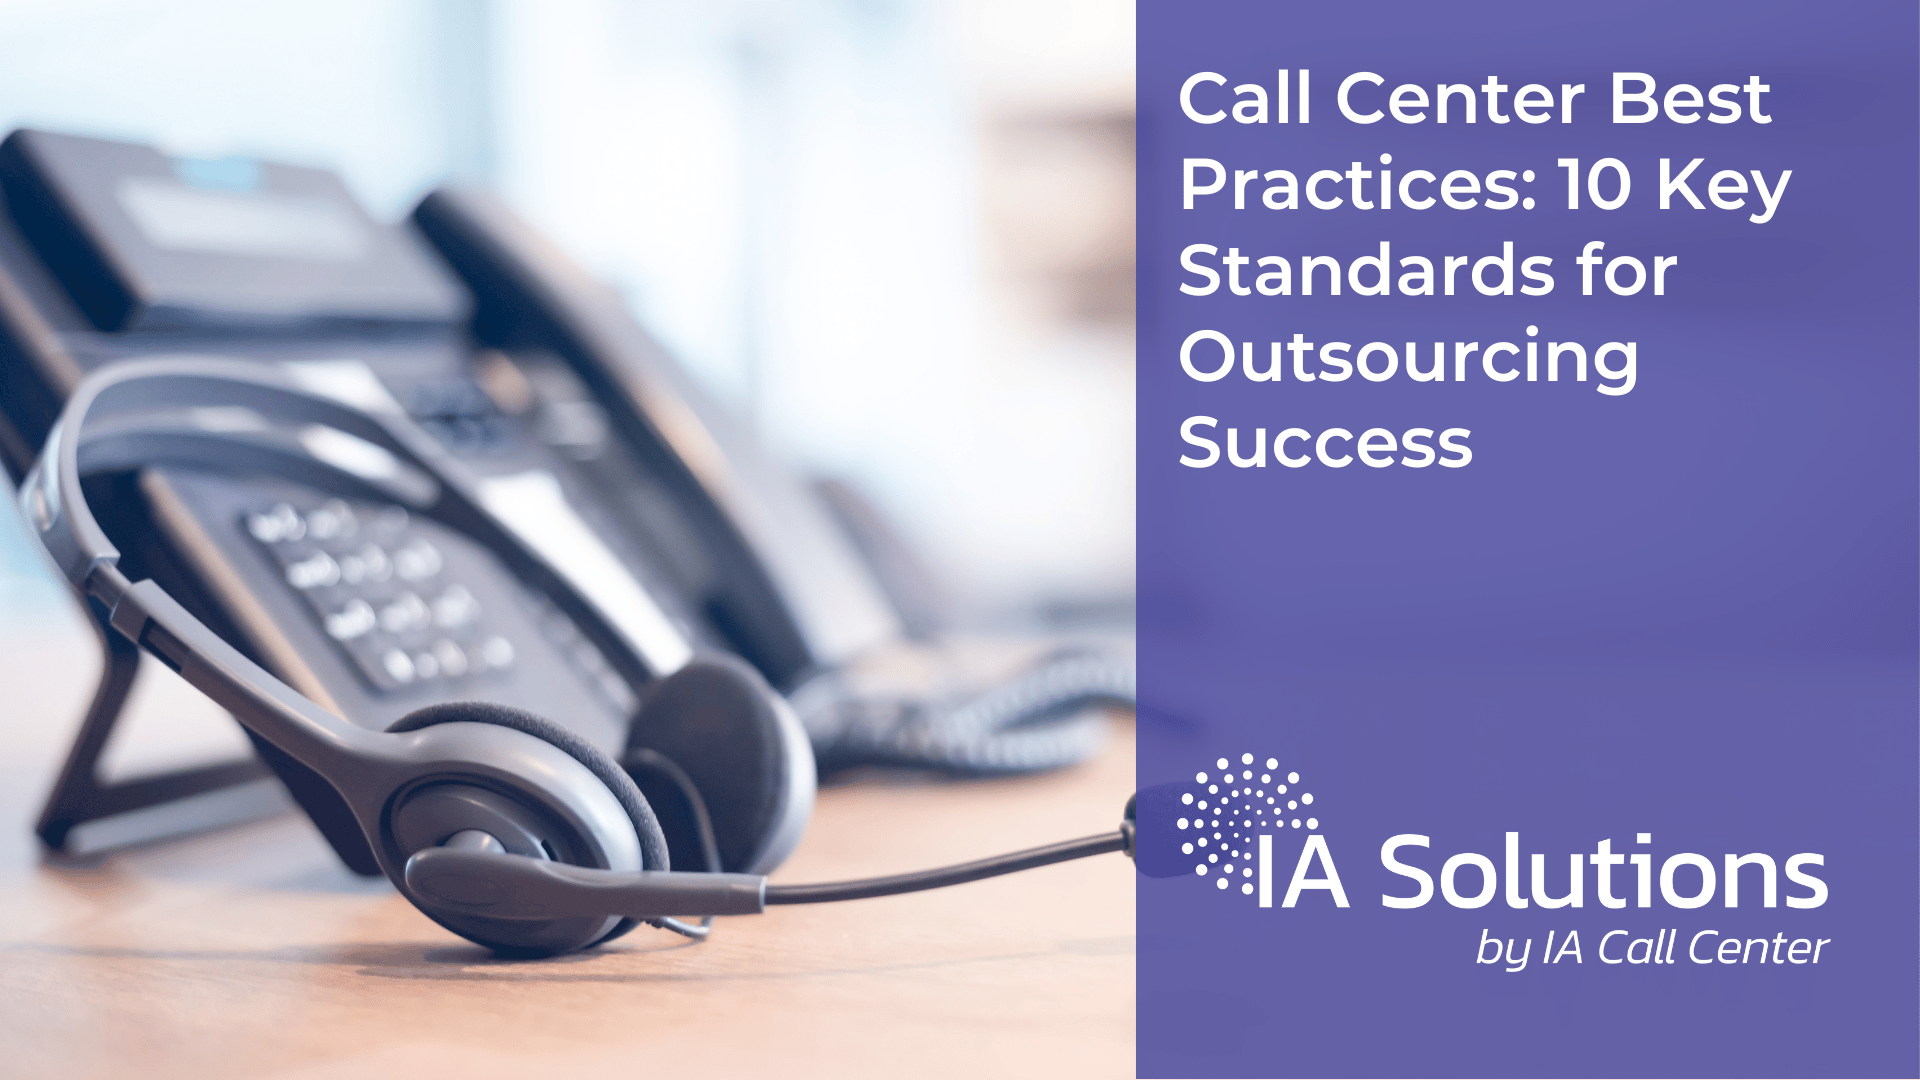 Call Center Best Practices 10 Key Standards for Outsourcing Success Featured Image